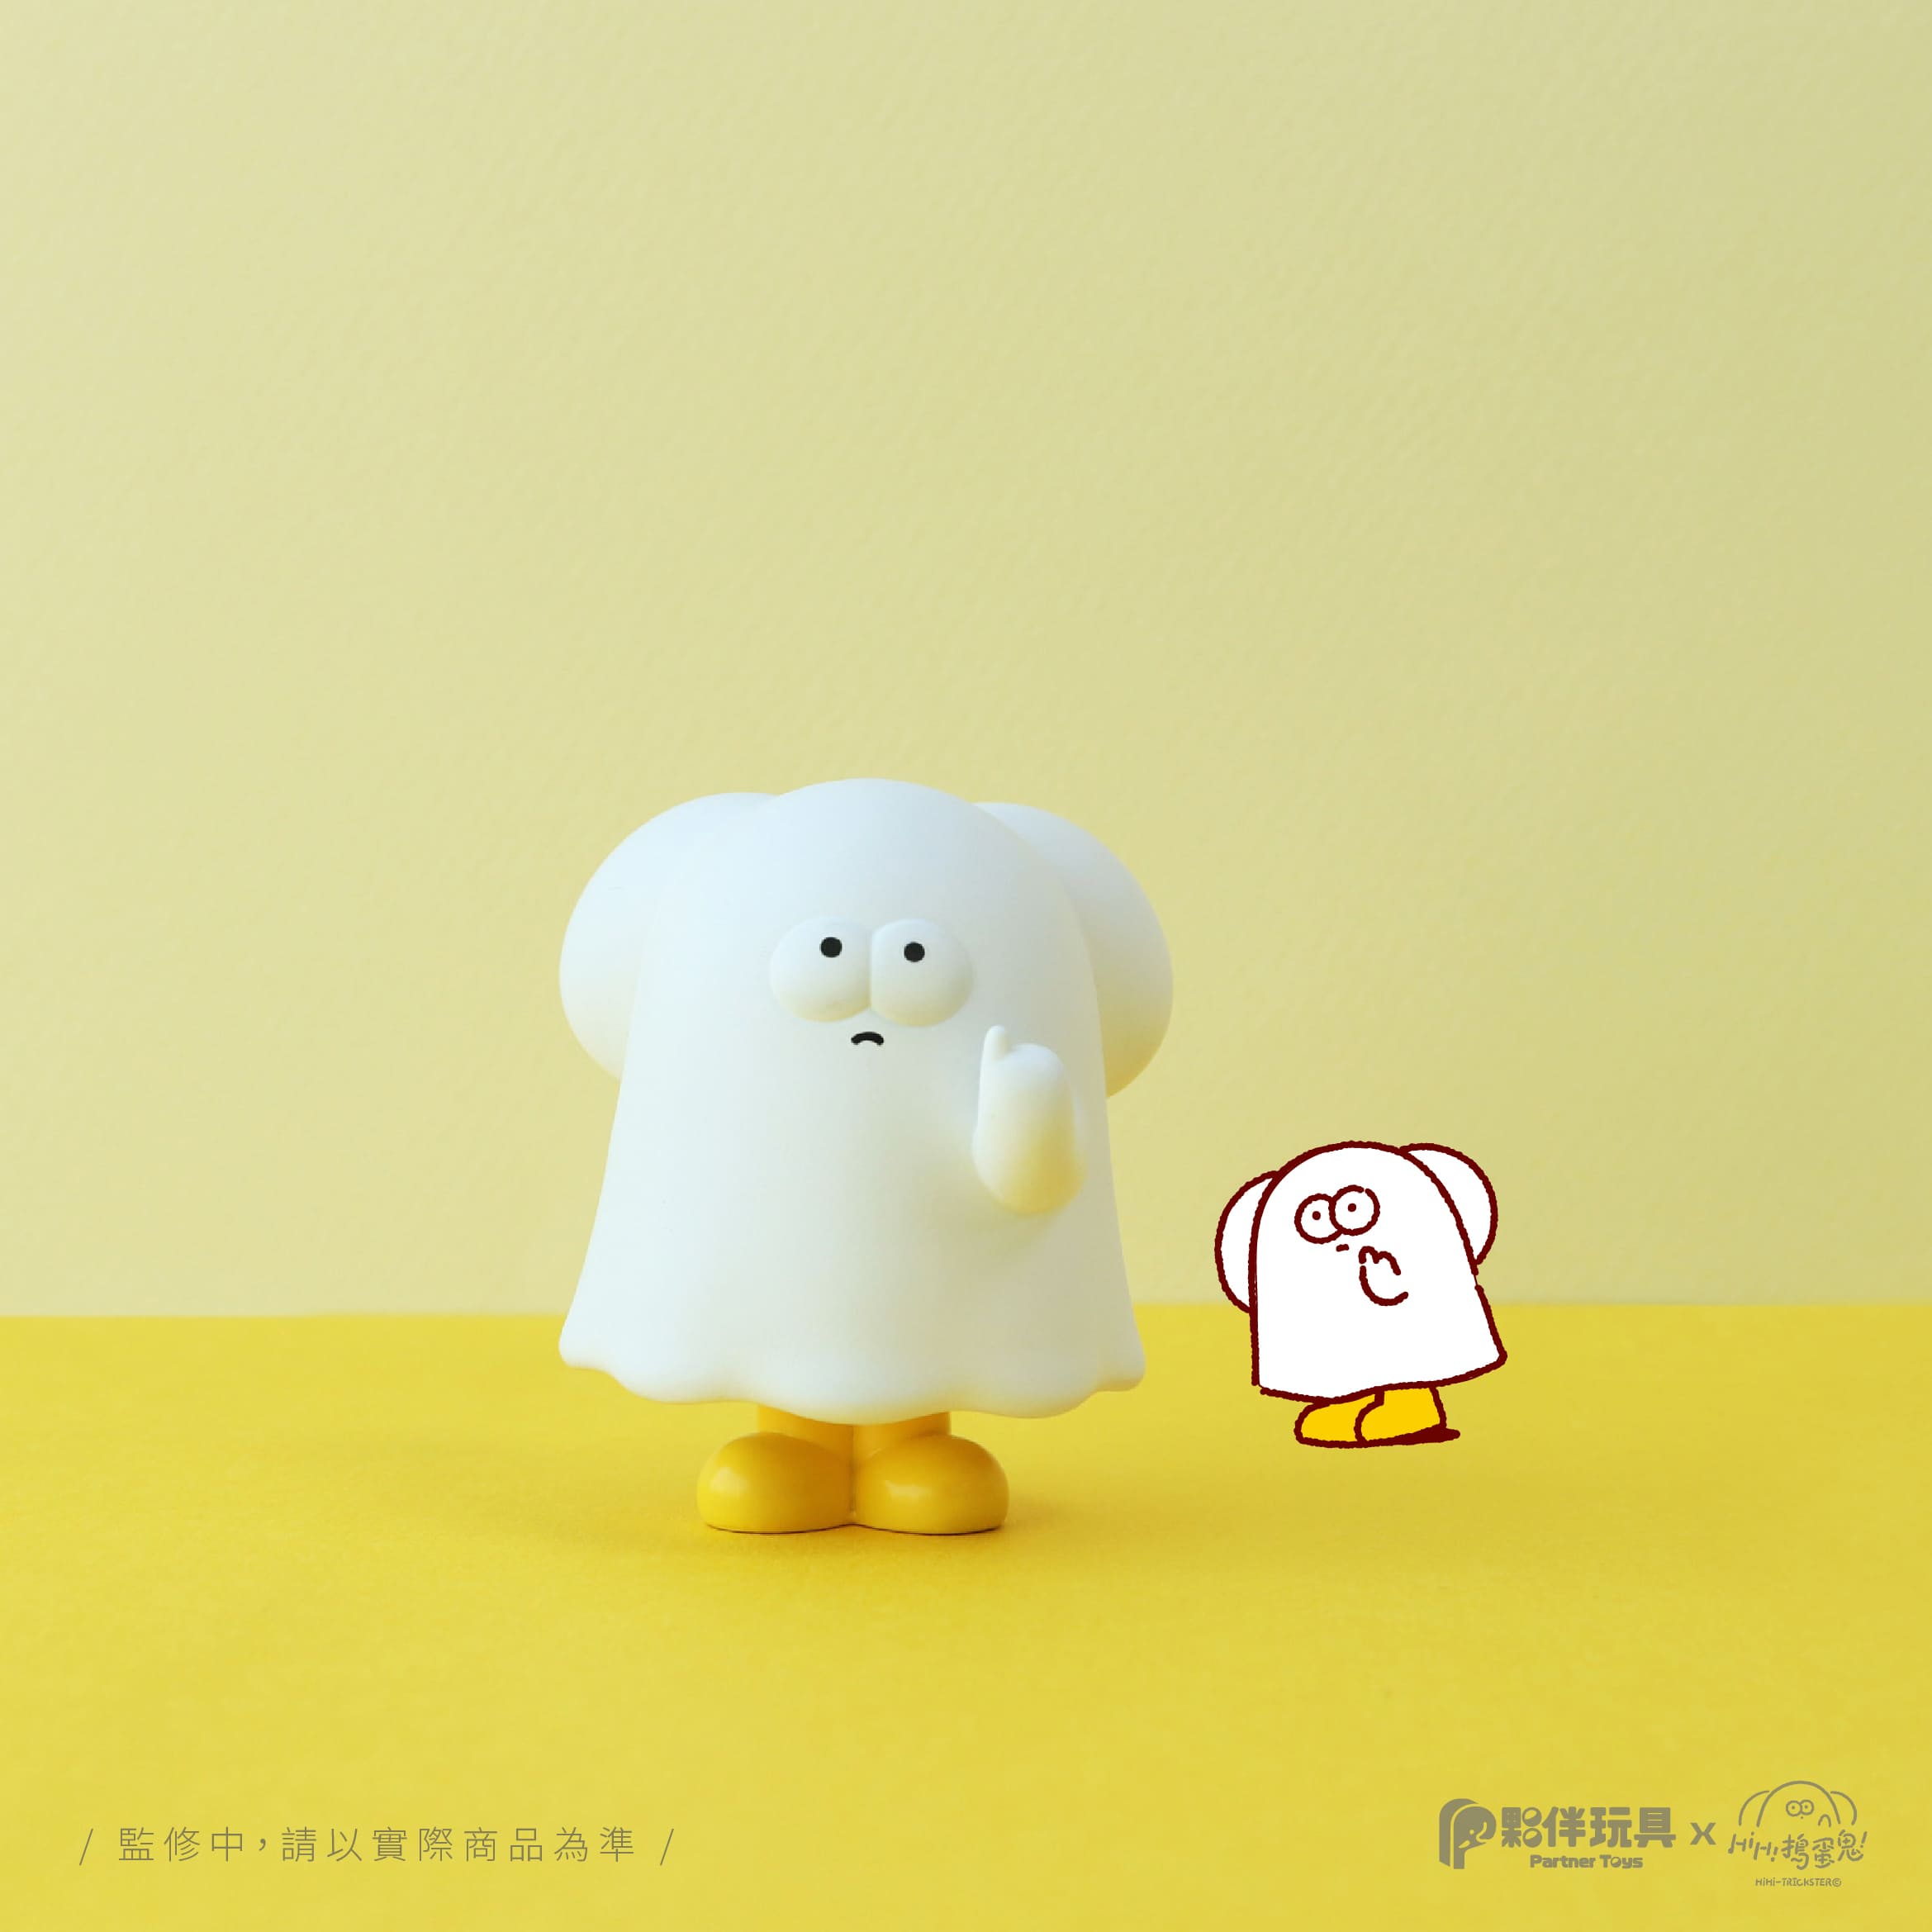 HIHI TRICKSTER DAILY Blind Box Series toy figure with ghost garment, sad face, and cartoon character features.